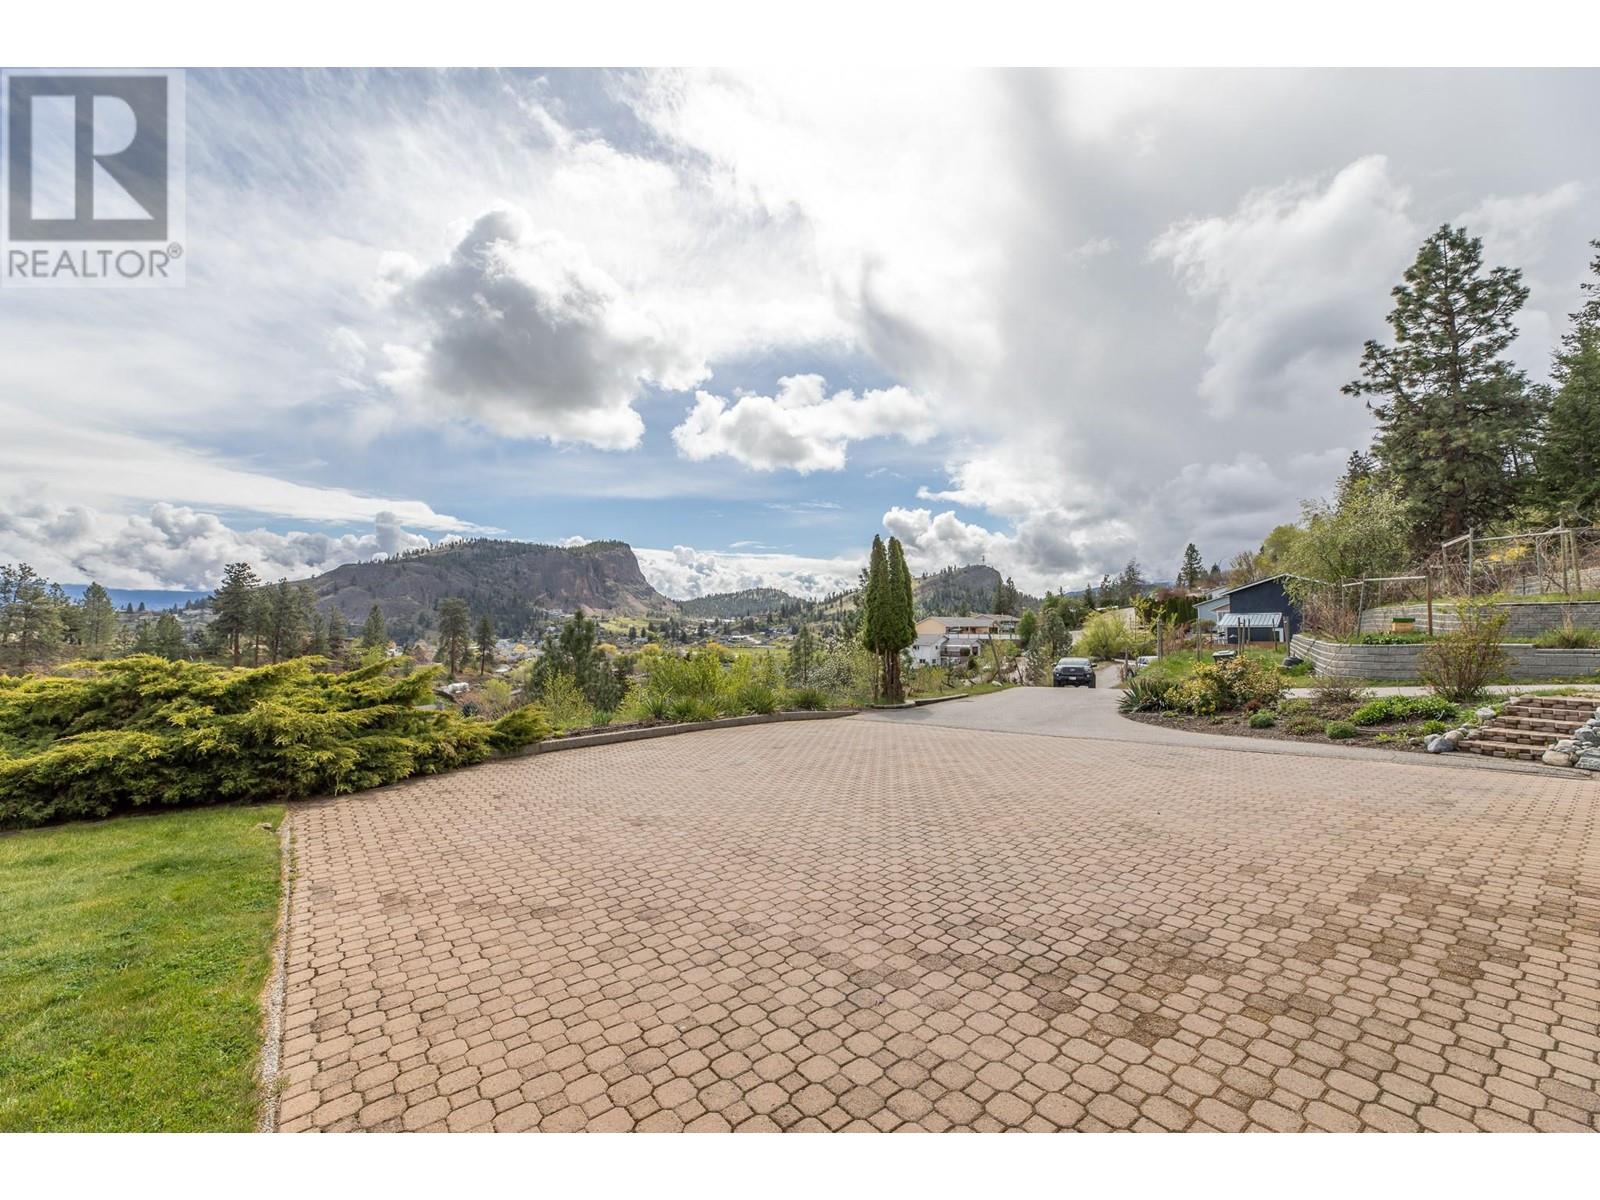 12600 Taylor Place Summerland